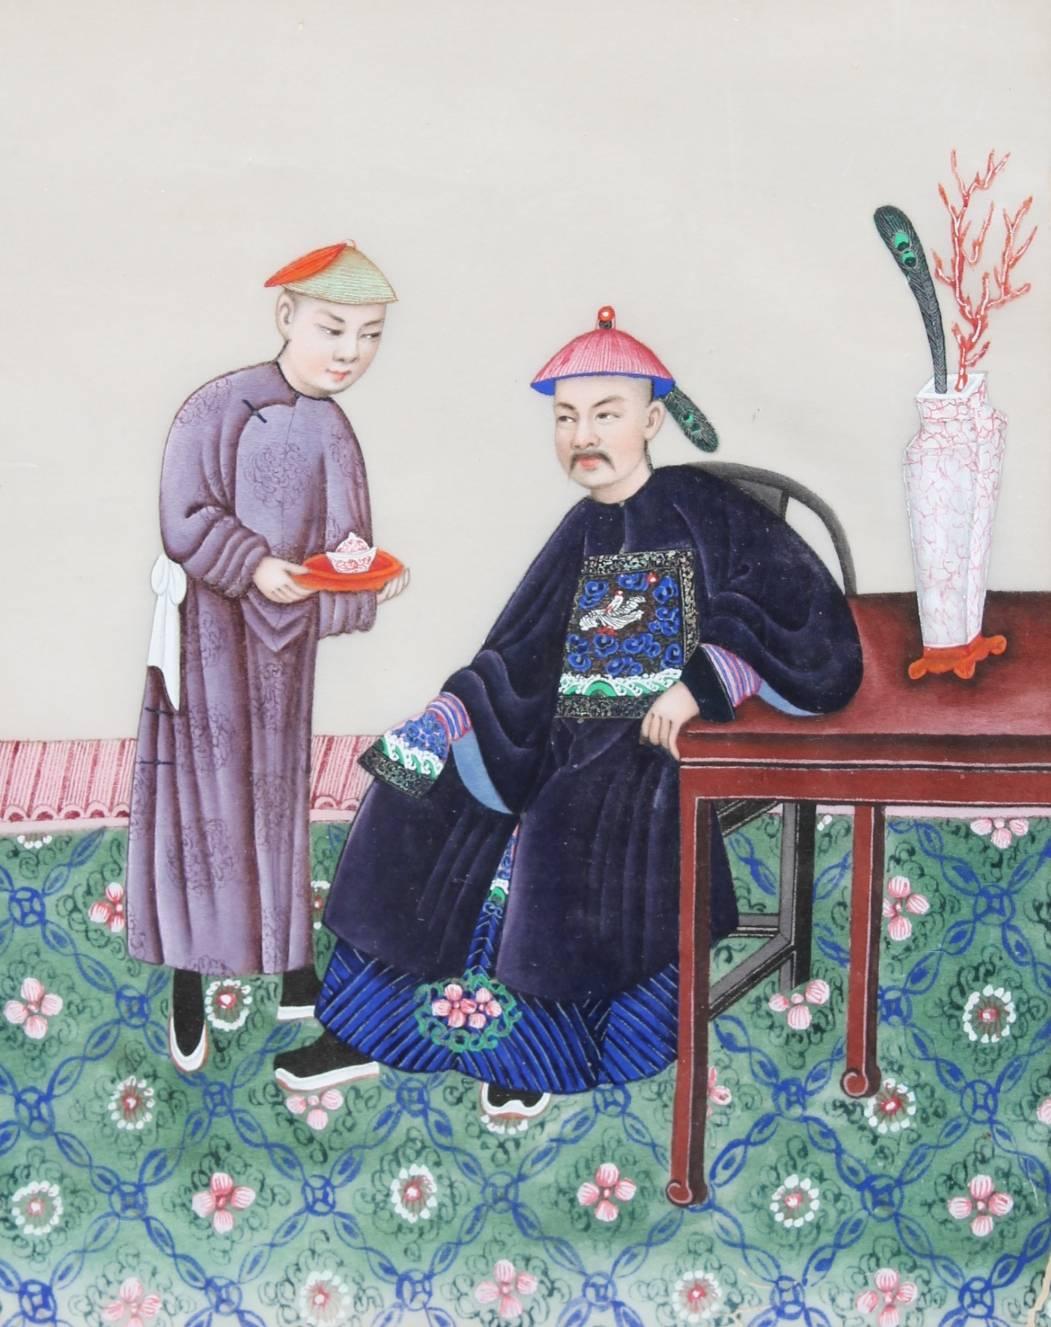 A male attendant serving tea to a noble , seated beside a table with a vase issuing a peacock feather and a branch of coral, together with a depiction of a female attendant serving tea to a noble woman, seated on beside a low table with a blue